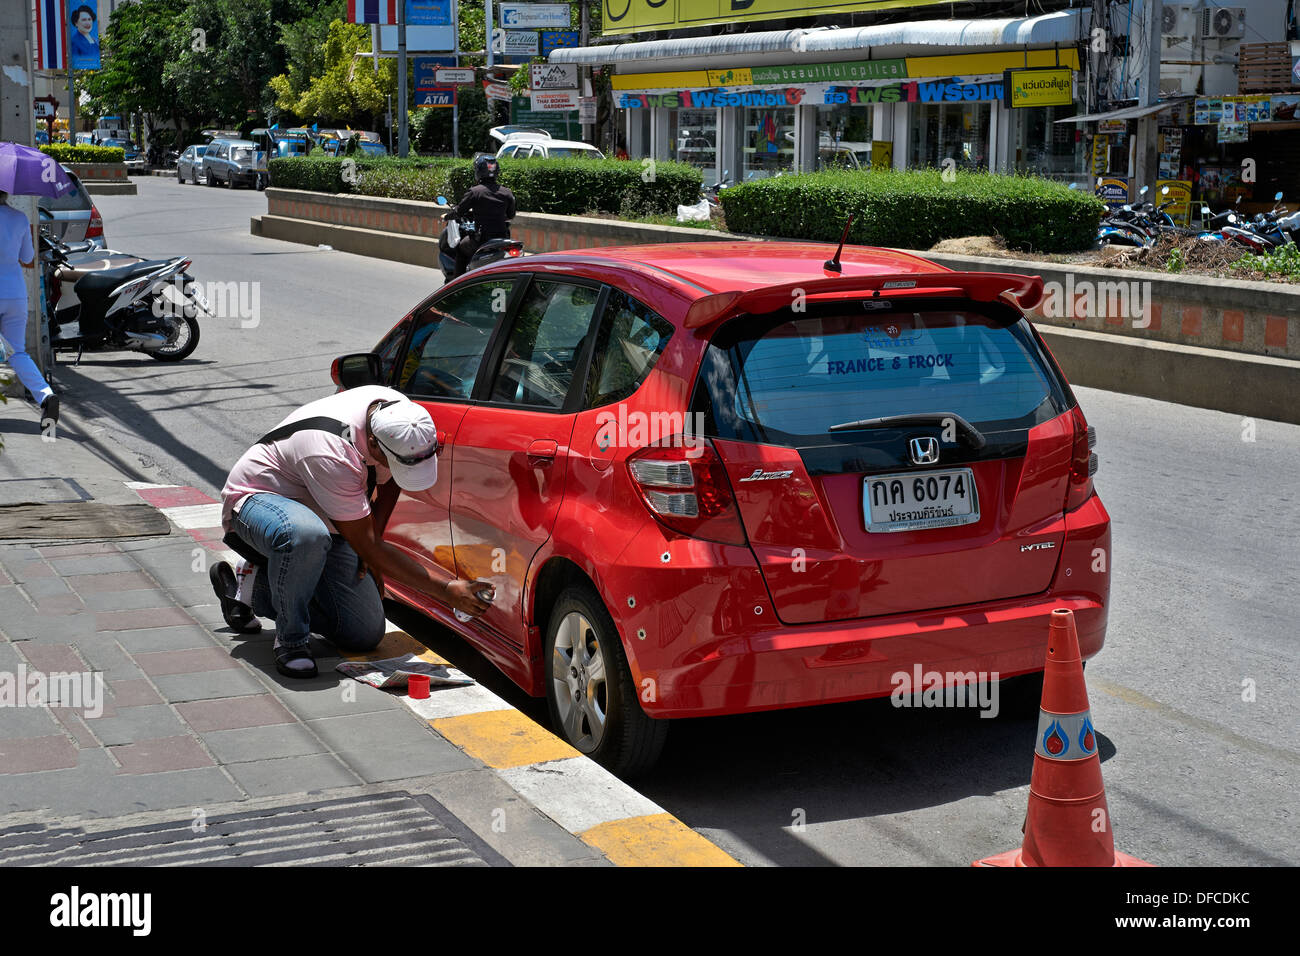 Man undertaking roadside repairs and respraying paintwork on a red Honda Jazz using a spray can. Thailand S. E. Asia Stock Photo